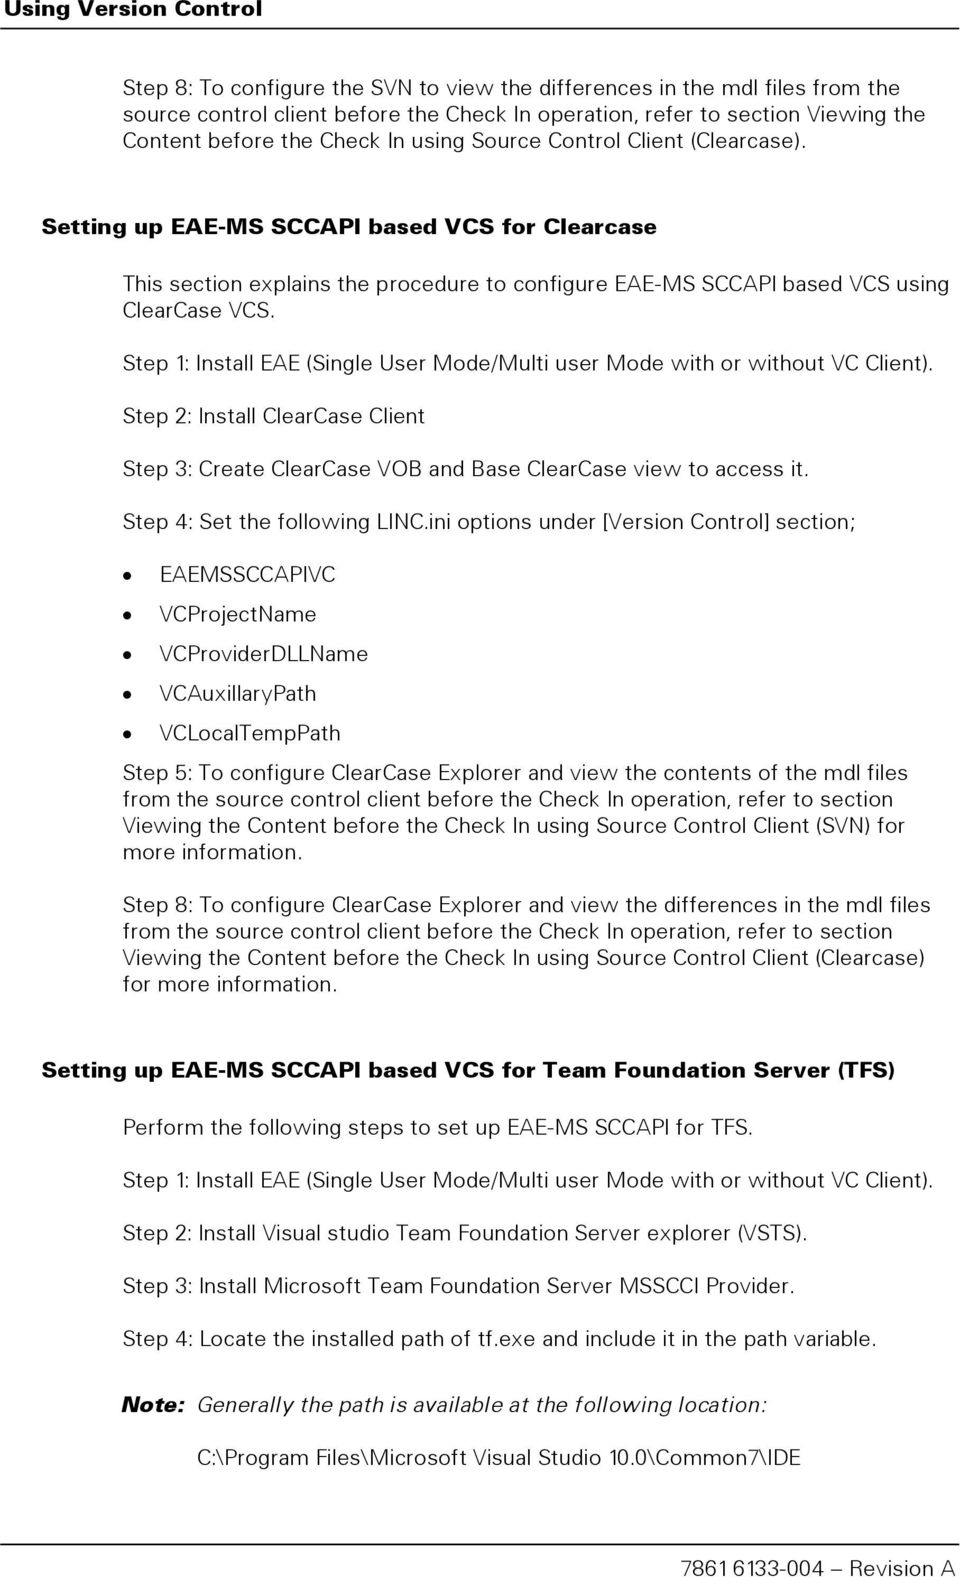 Step 1: Install EAE (Single User Mode/Multi user Mode with or without VC Client). Step 2: Install ClearCase Client Step 3: Create ClearCase VOB and Base ClearCase view to access it.